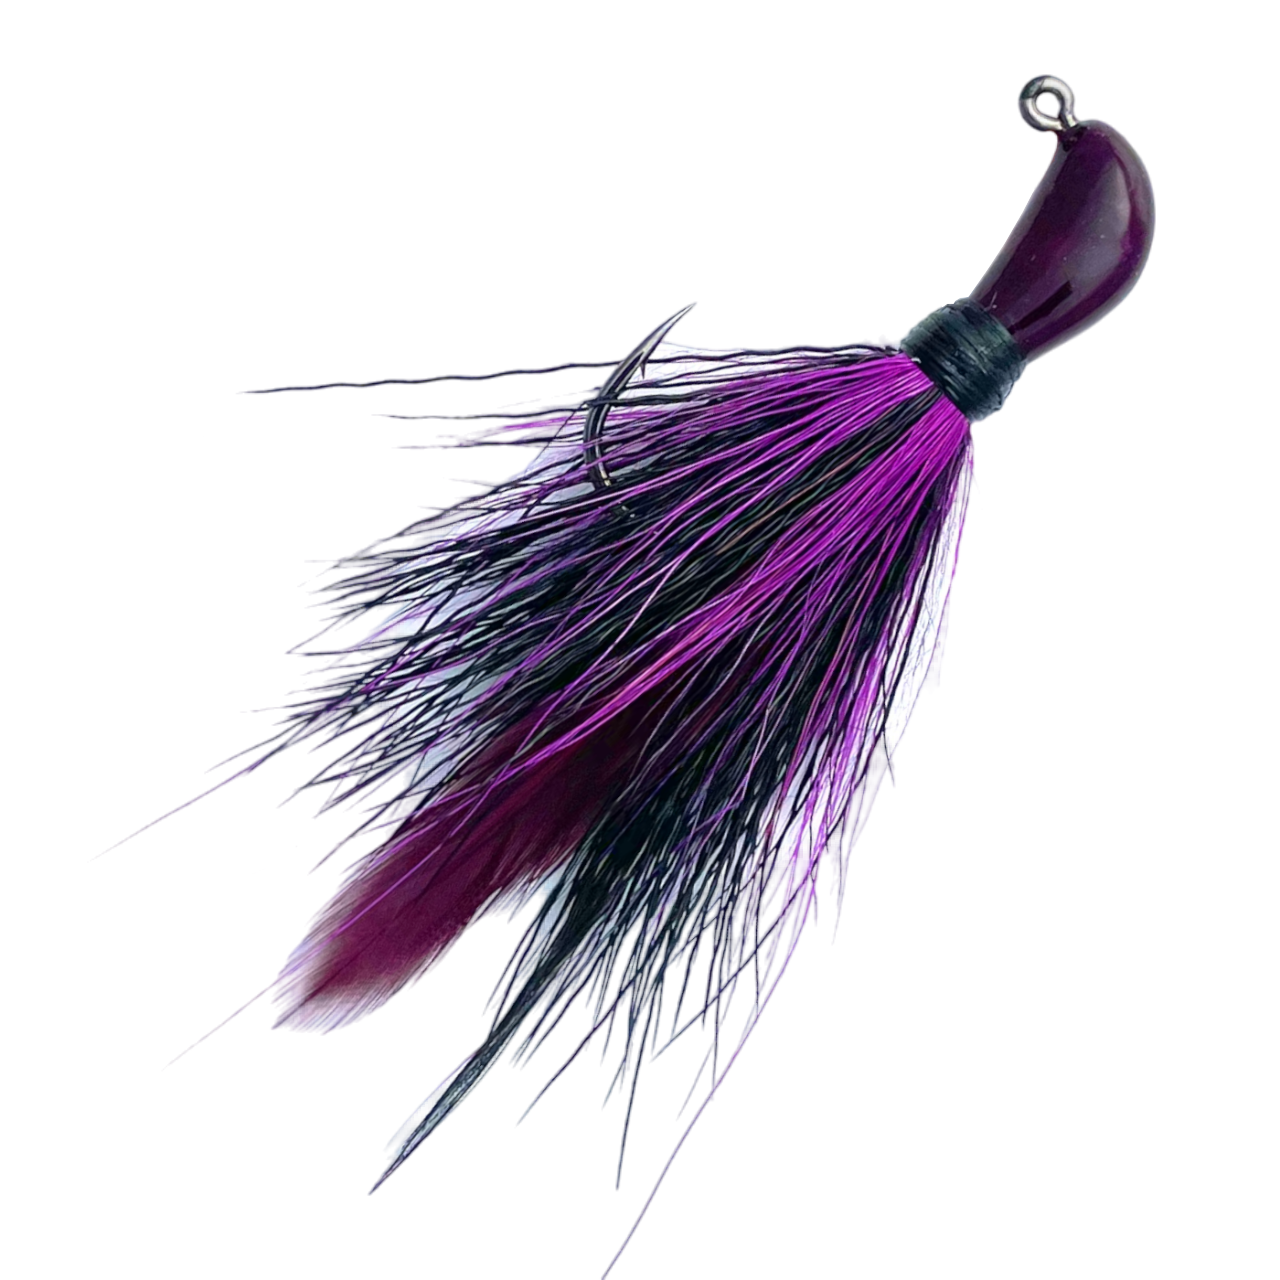 Feathered Bucktail Jig